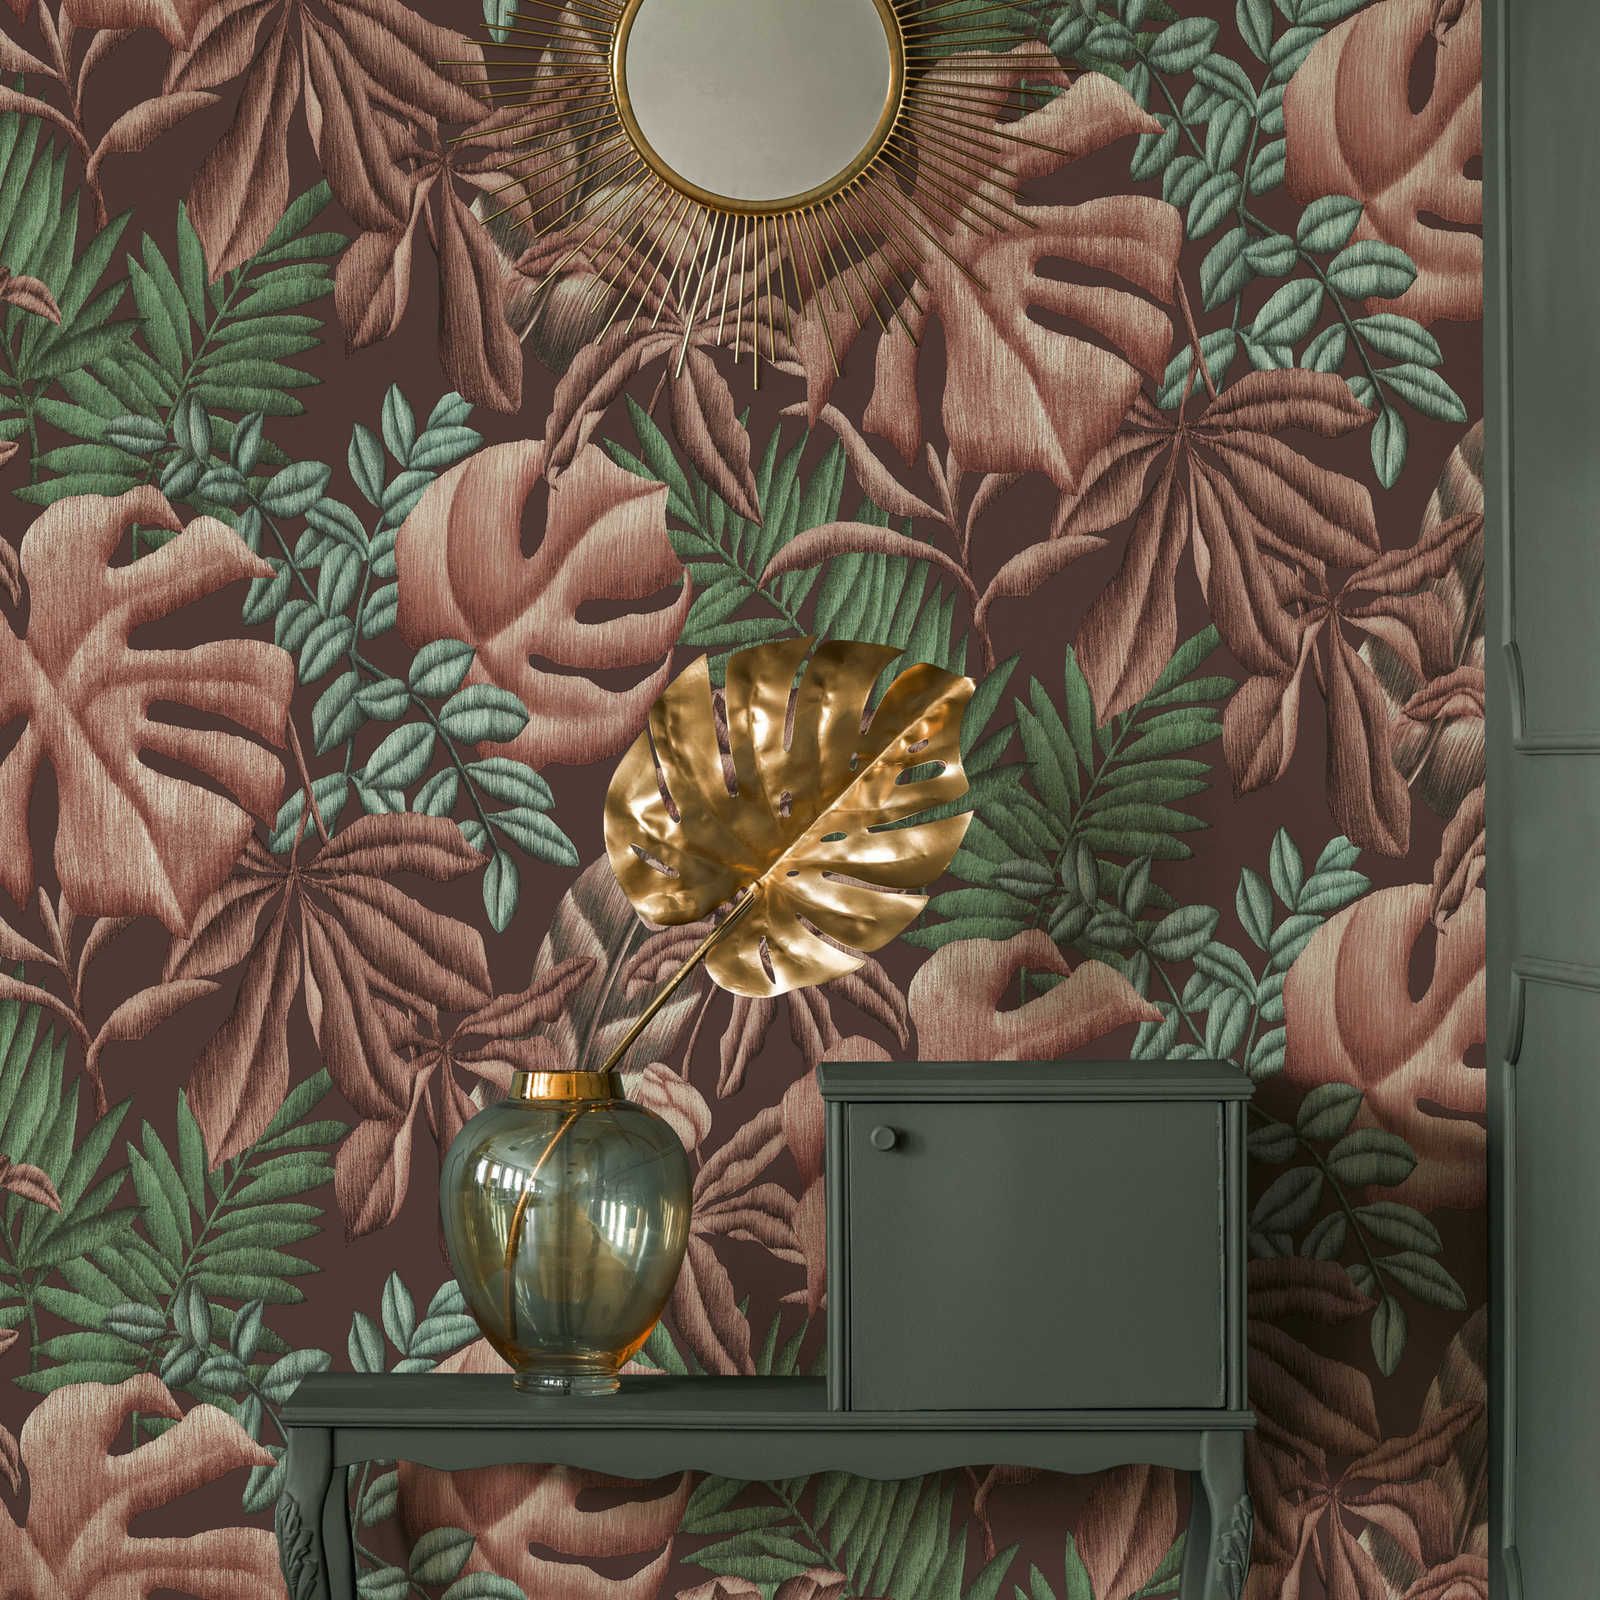 Floral non-woven wallpaper with leaves fern & banana leaves - pink, green, turquoise
